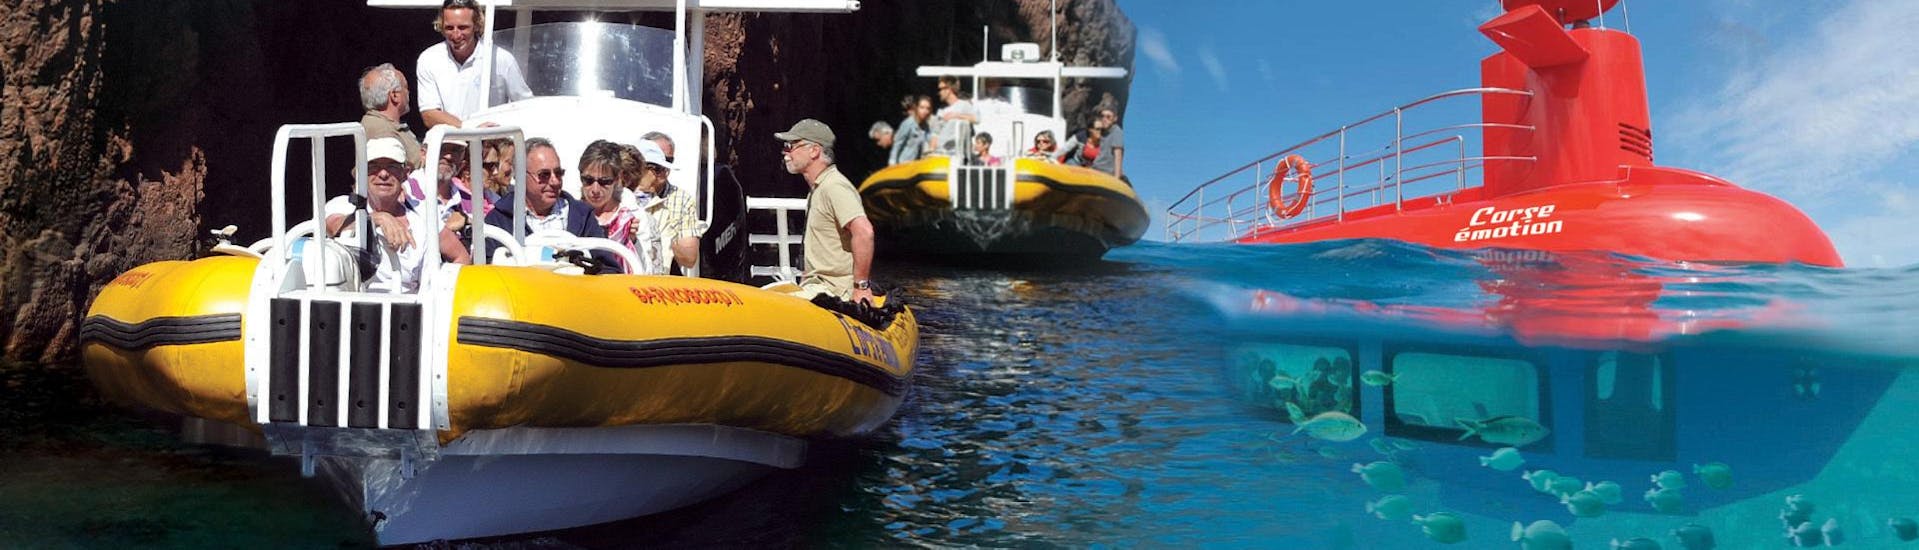 The different boats available from Corse Emotion.